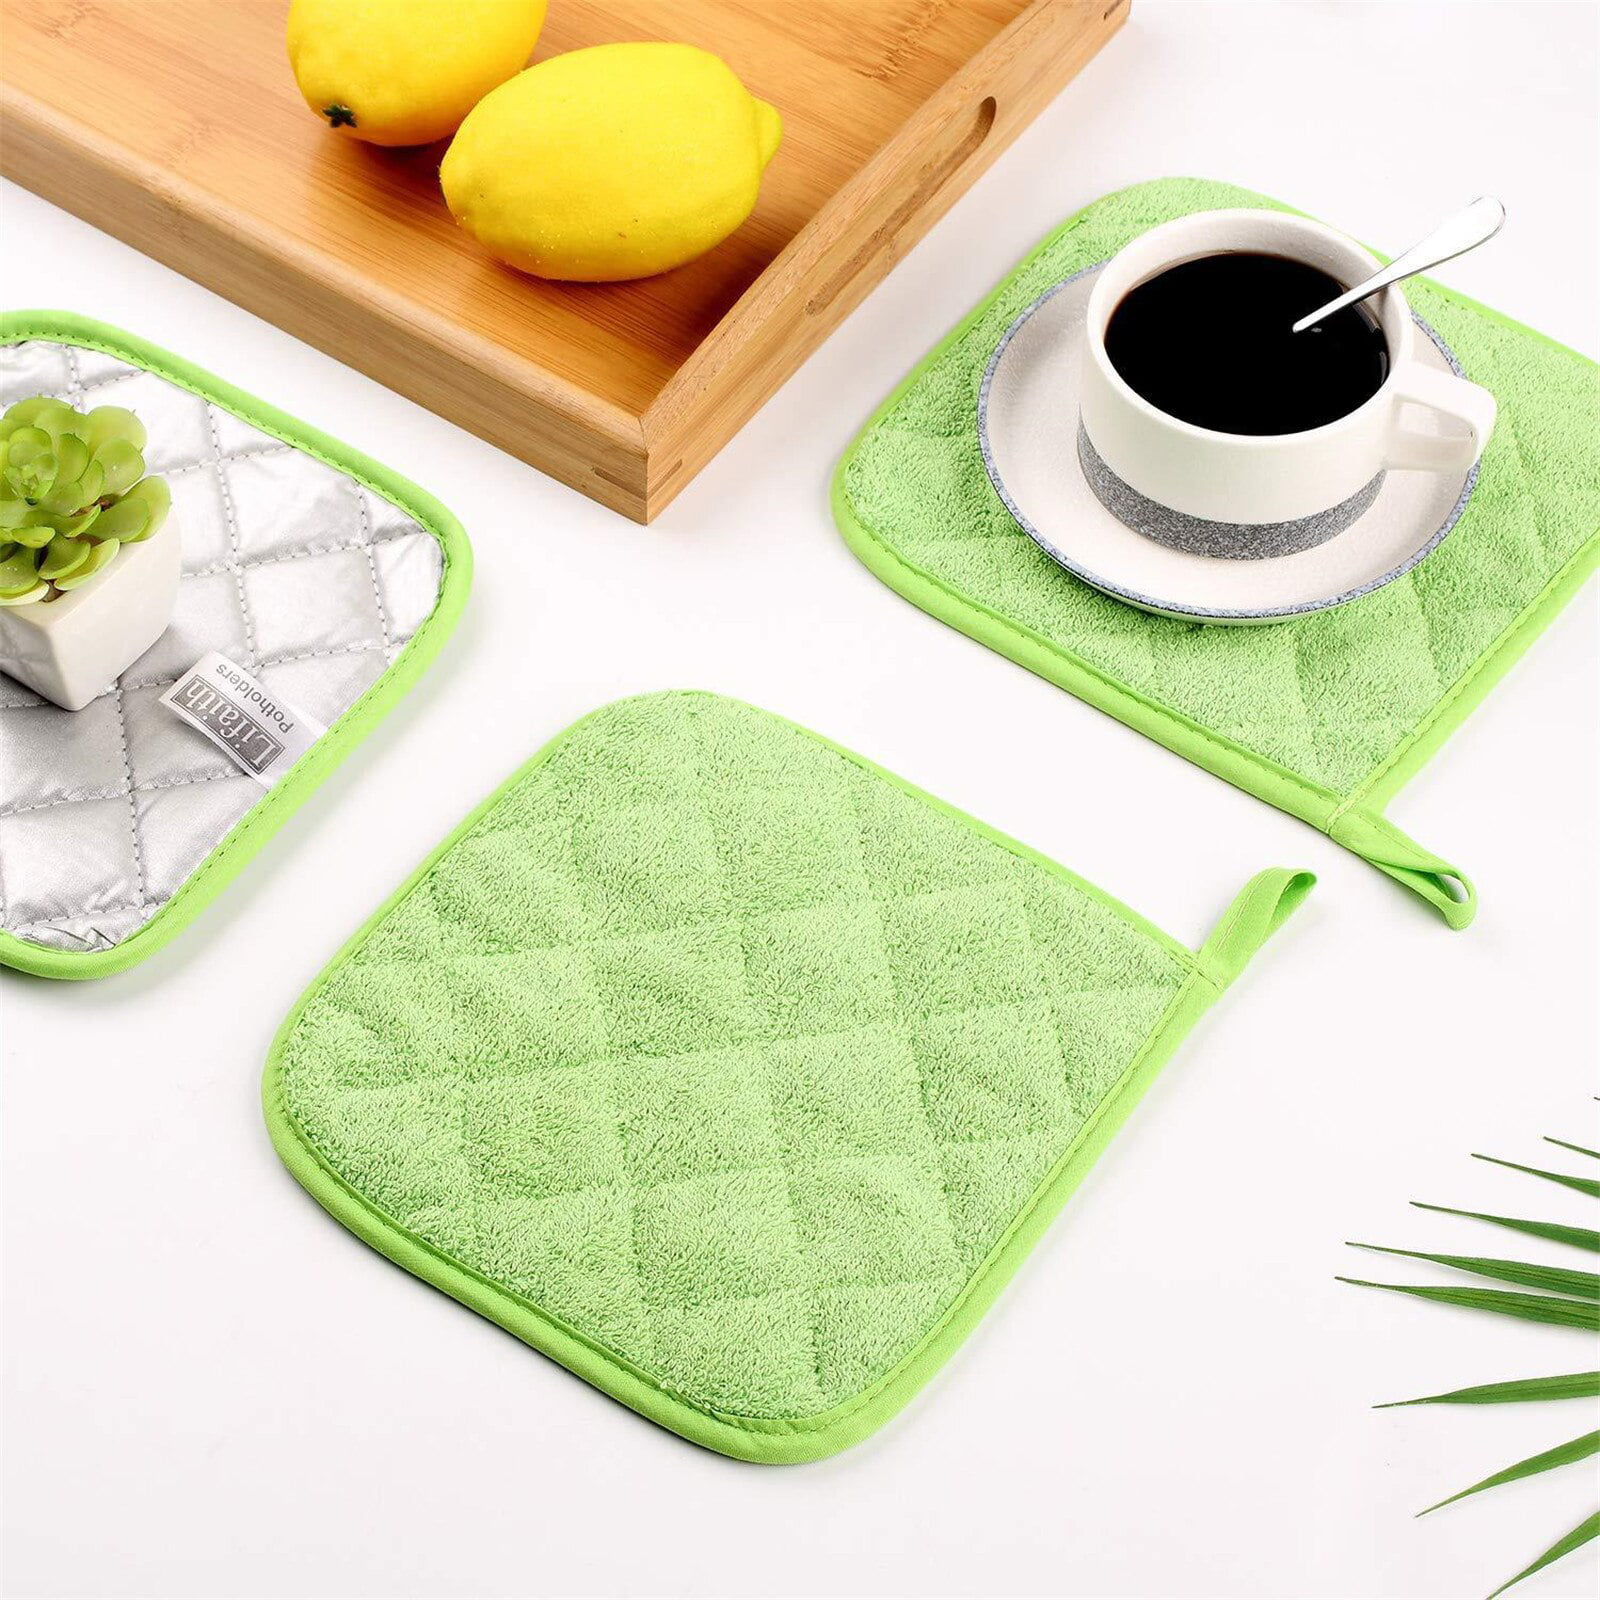 Lifaith 100% Cotton with Silicone Kitchen Everyday Basic Pot Holder Heat  Resistant Coaster Potholder Oven Mitts with Pocket for Cooking and Baking  Set